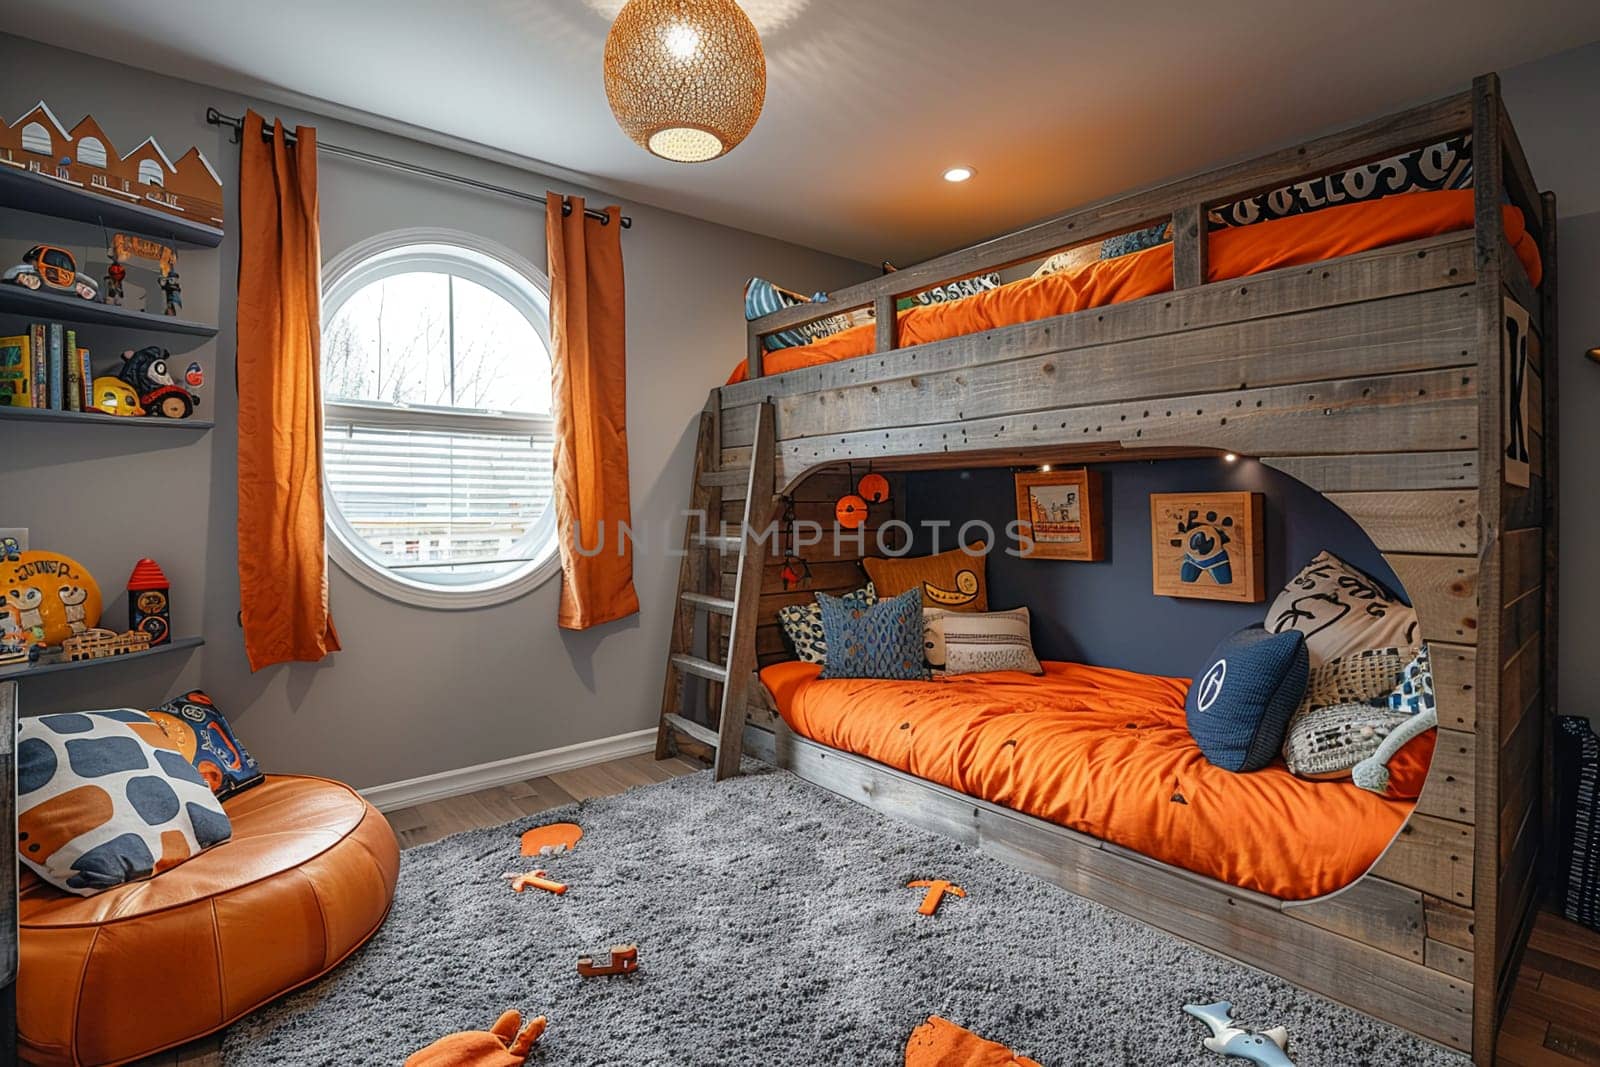 Adventure-themed kid's bedroom with a loft bed and imaginative play areas